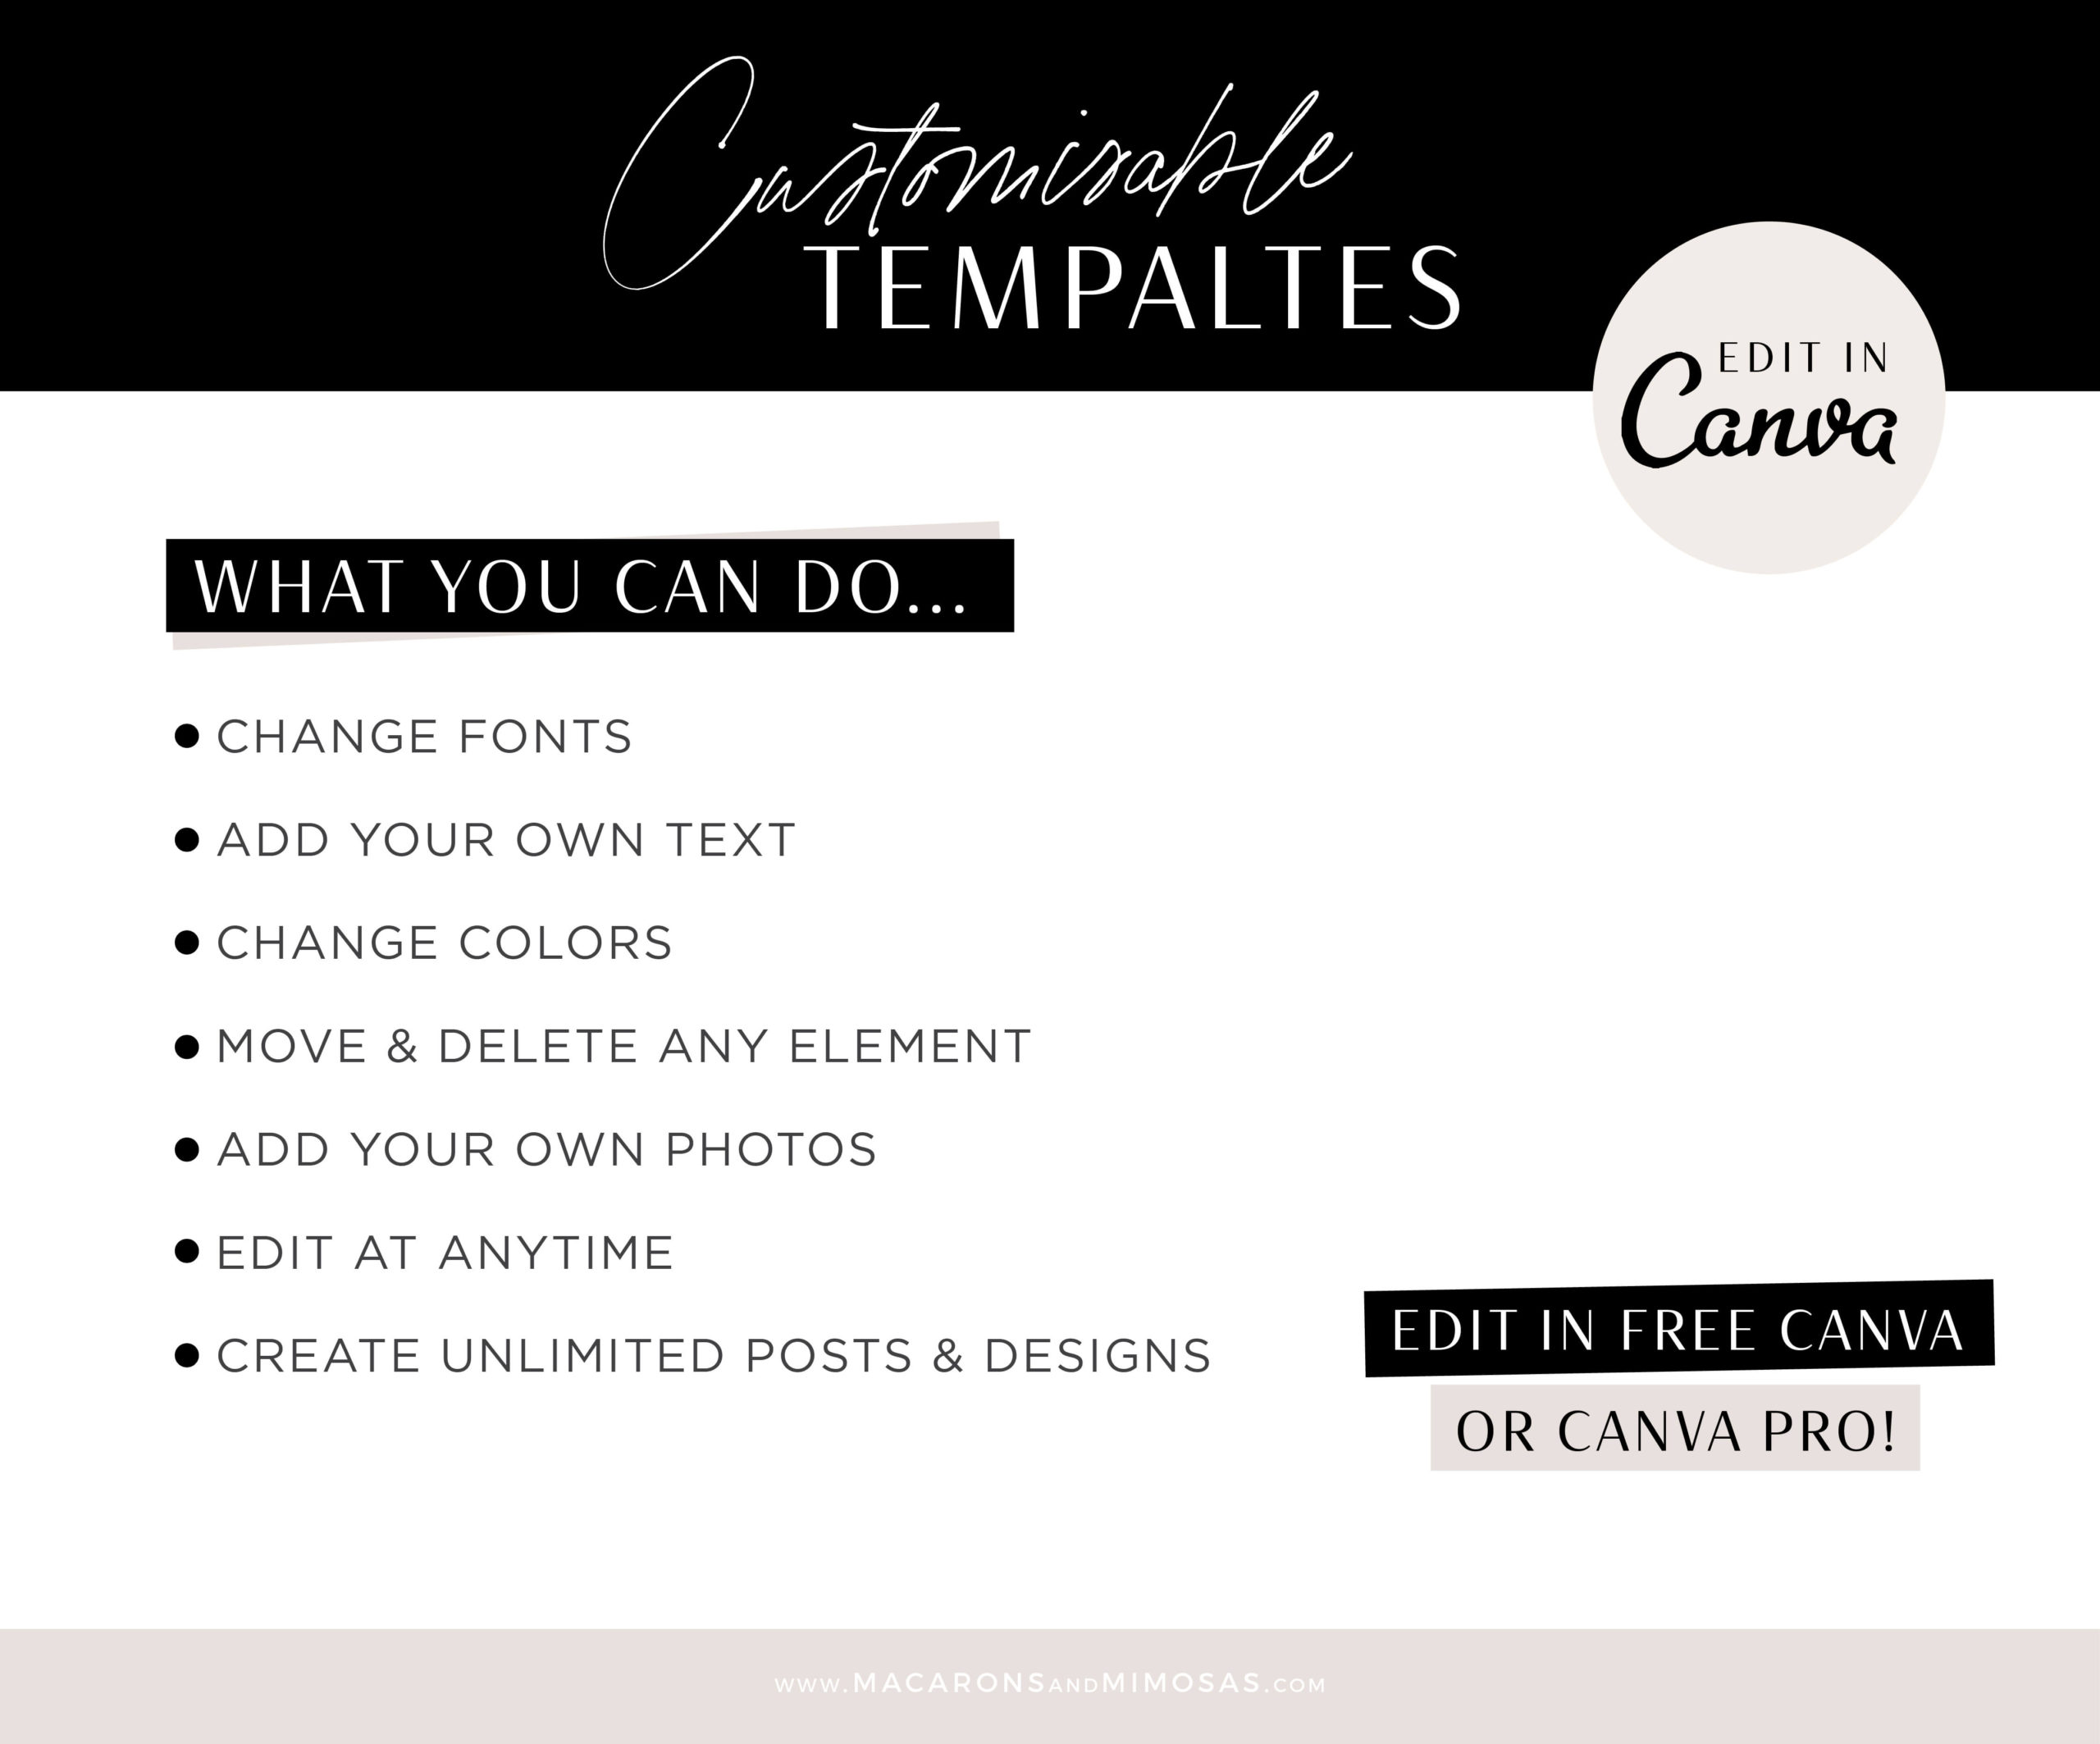 Minimalist Luxe Instagram Story Templates for Canva, Modern Black White Instagram for Stories and Posts, Beauty Templates for Instagram Reels